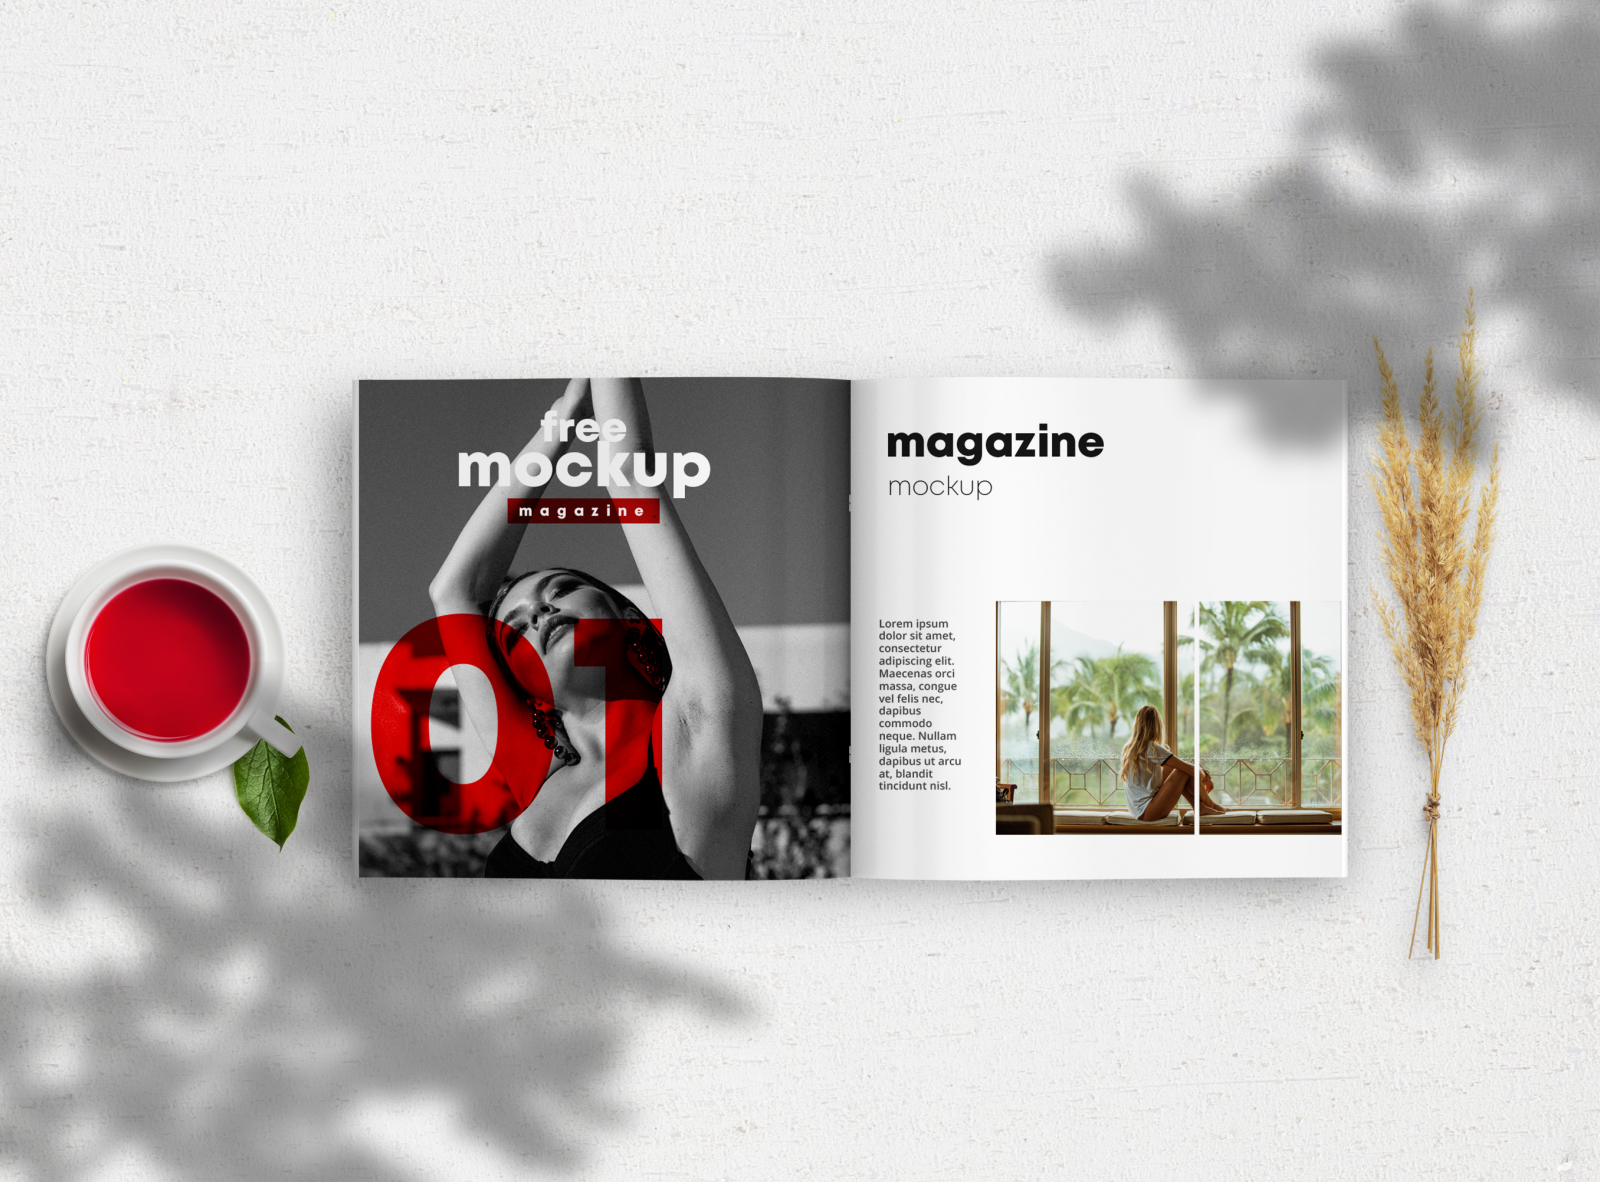 Download Opened Square Magazine Free Mockup by Pixelsdesign.net on Dribbble